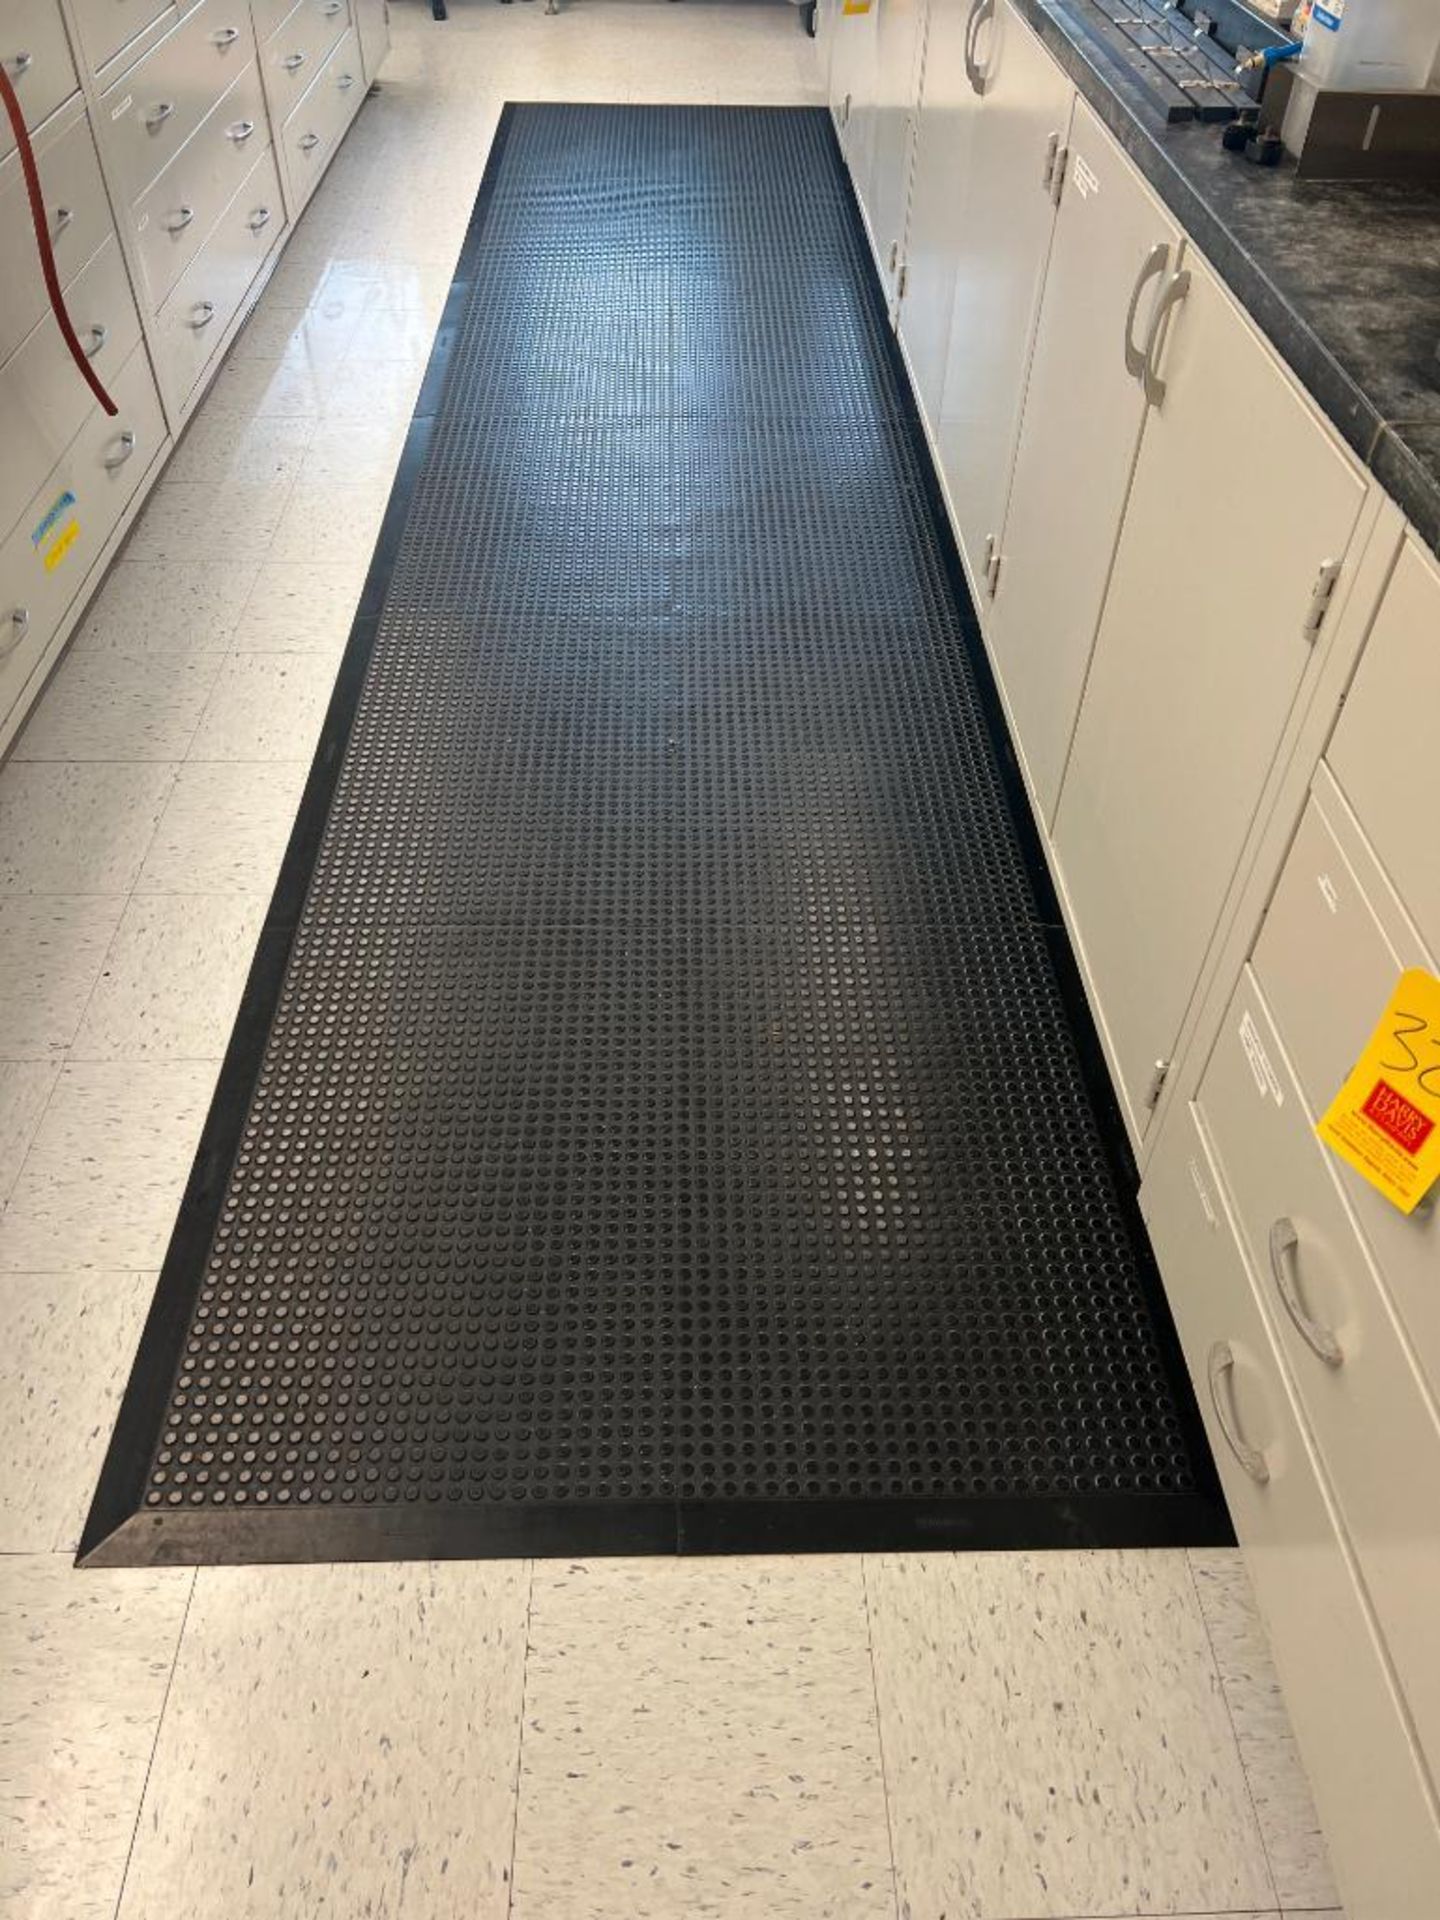 Rubber Floor Mats, Dimensions = 16' x 44" and (3) 20' x 44" - Rigging Fee: $50 - Image 4 of 4